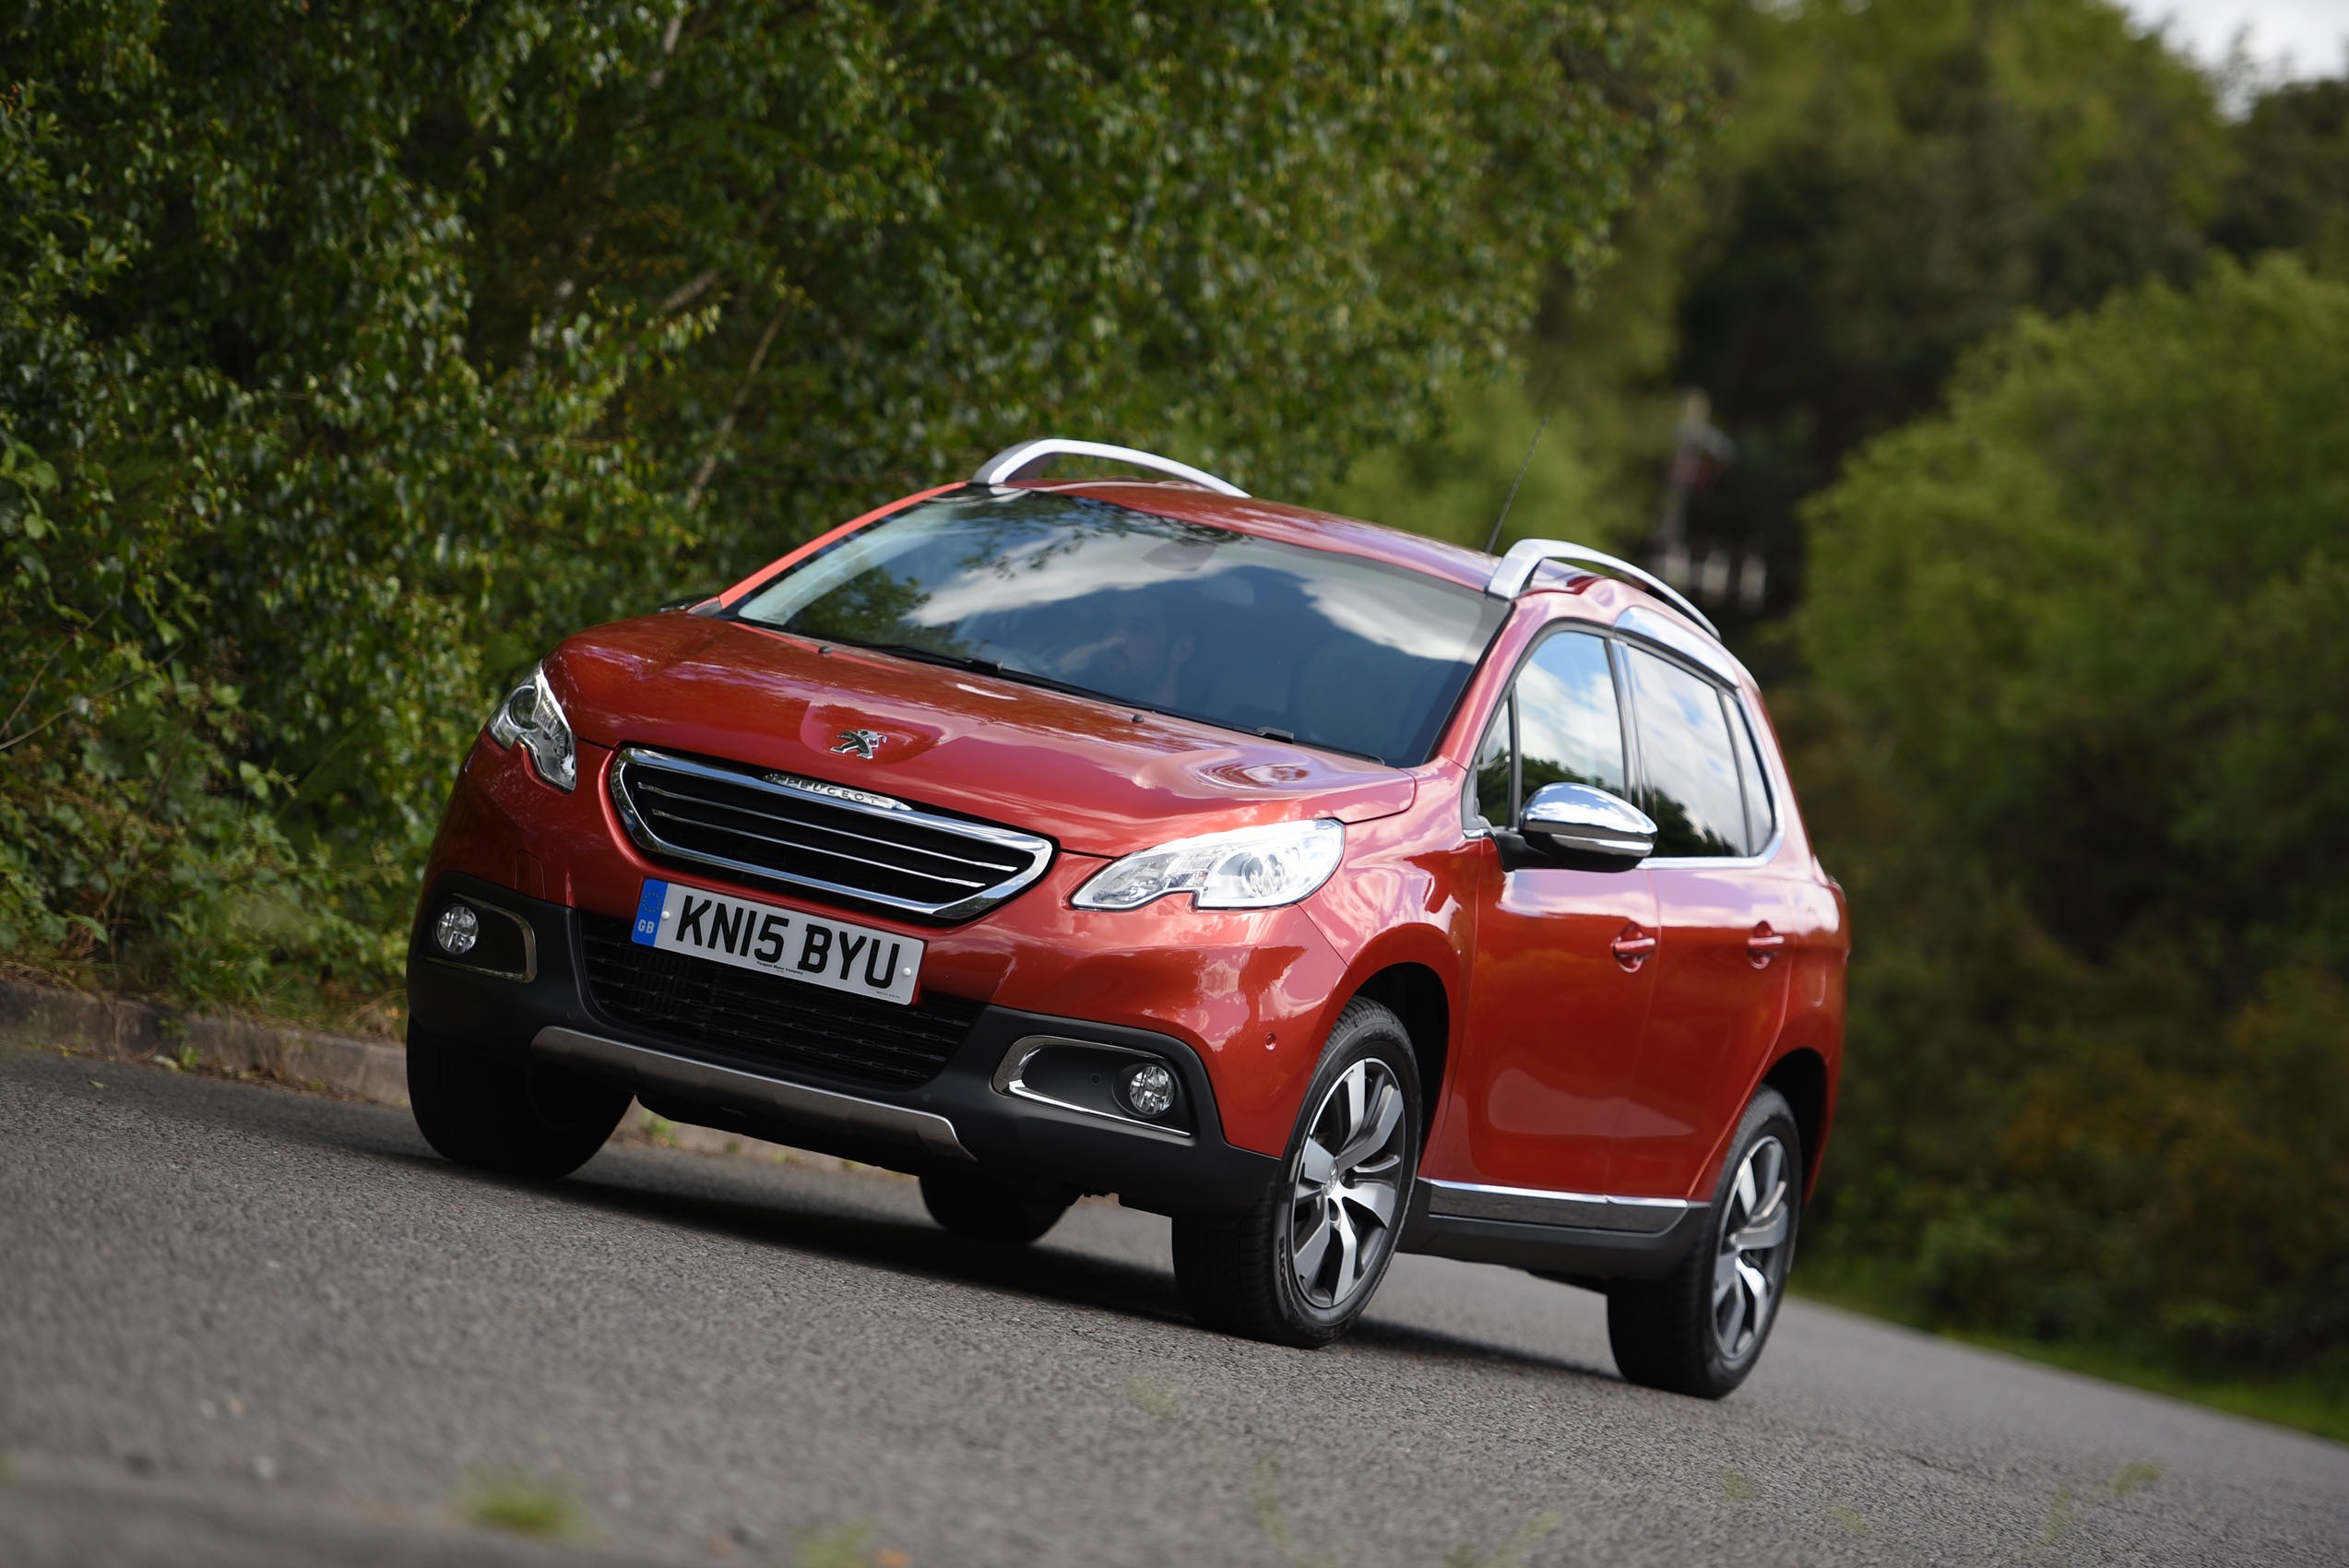 Peugeot 2008 tuning -   Peugeot 2008, Peugeot, Compact  crossover